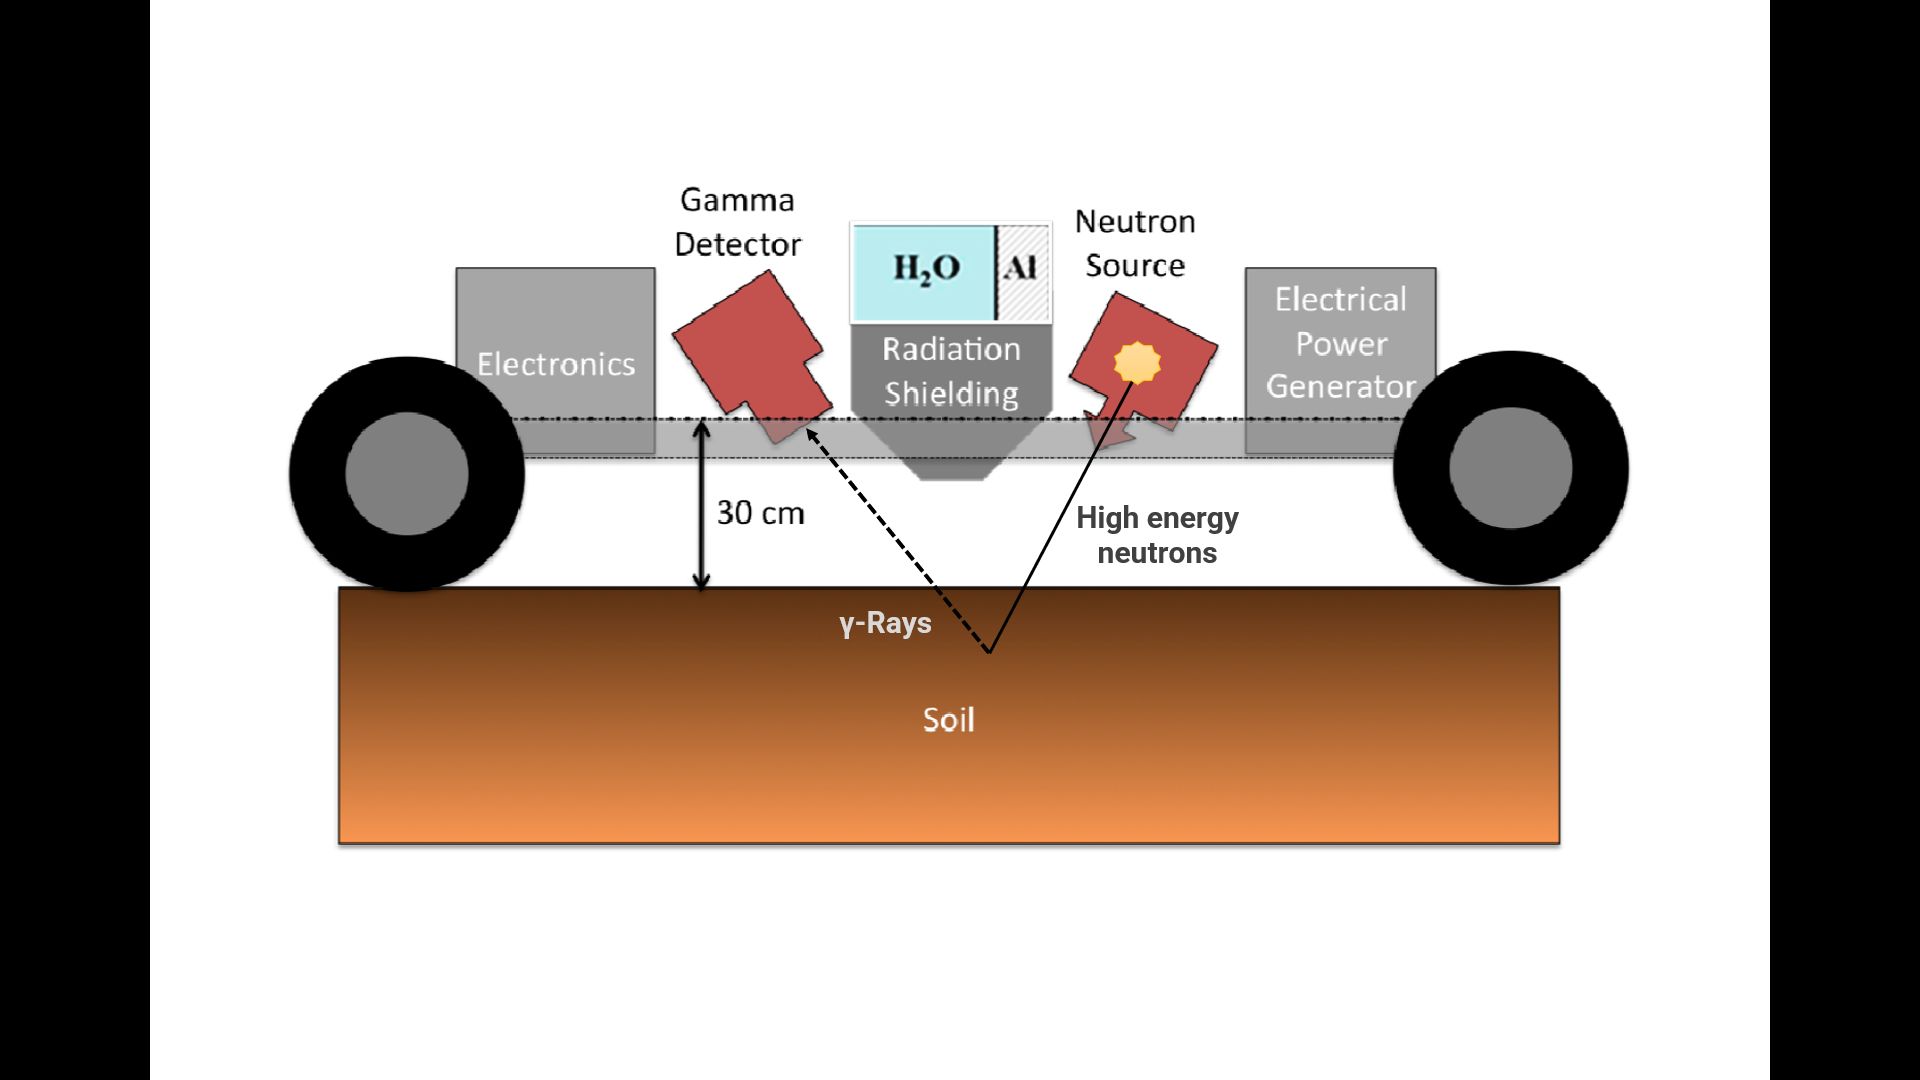 This is a simplified depiction of the Brookhaven INS device based on Wielopolski et al. (2008). The principal components of the device are a 14-MeV-neutron source and multiple gamma ray detectors, mounted on a four-wheeled cart, which would be capable of traversing arable land.